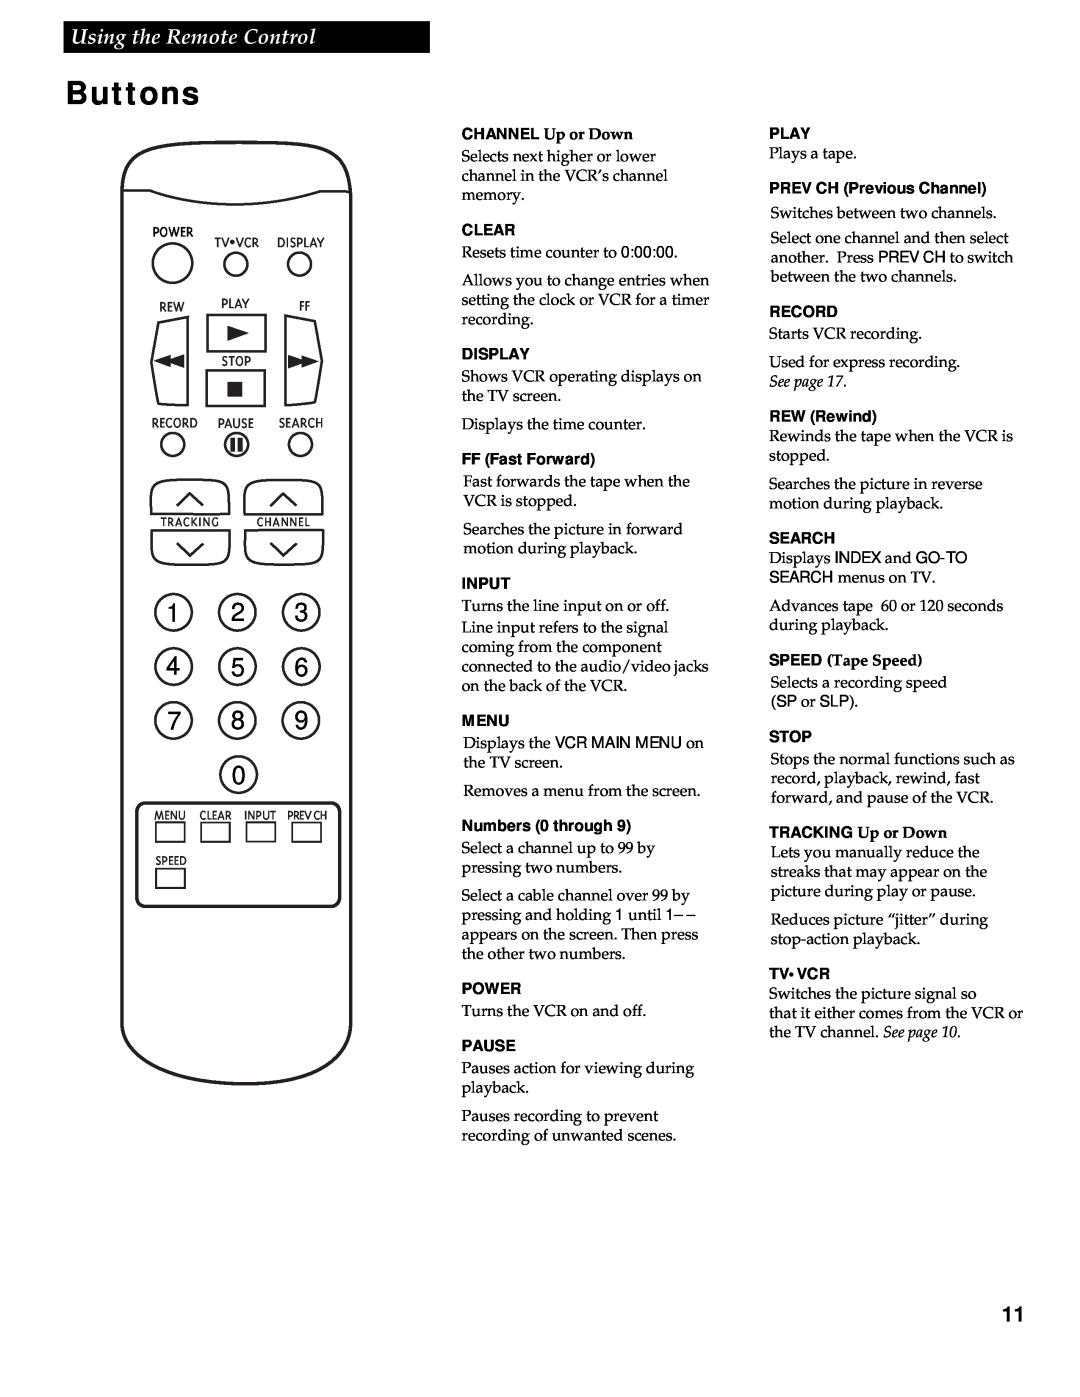 RCA VR336 manual Buttons, Using the Remote Control, 1 2 4 5 7, CHANNEL Up or Down, SPEED Tape Speed 